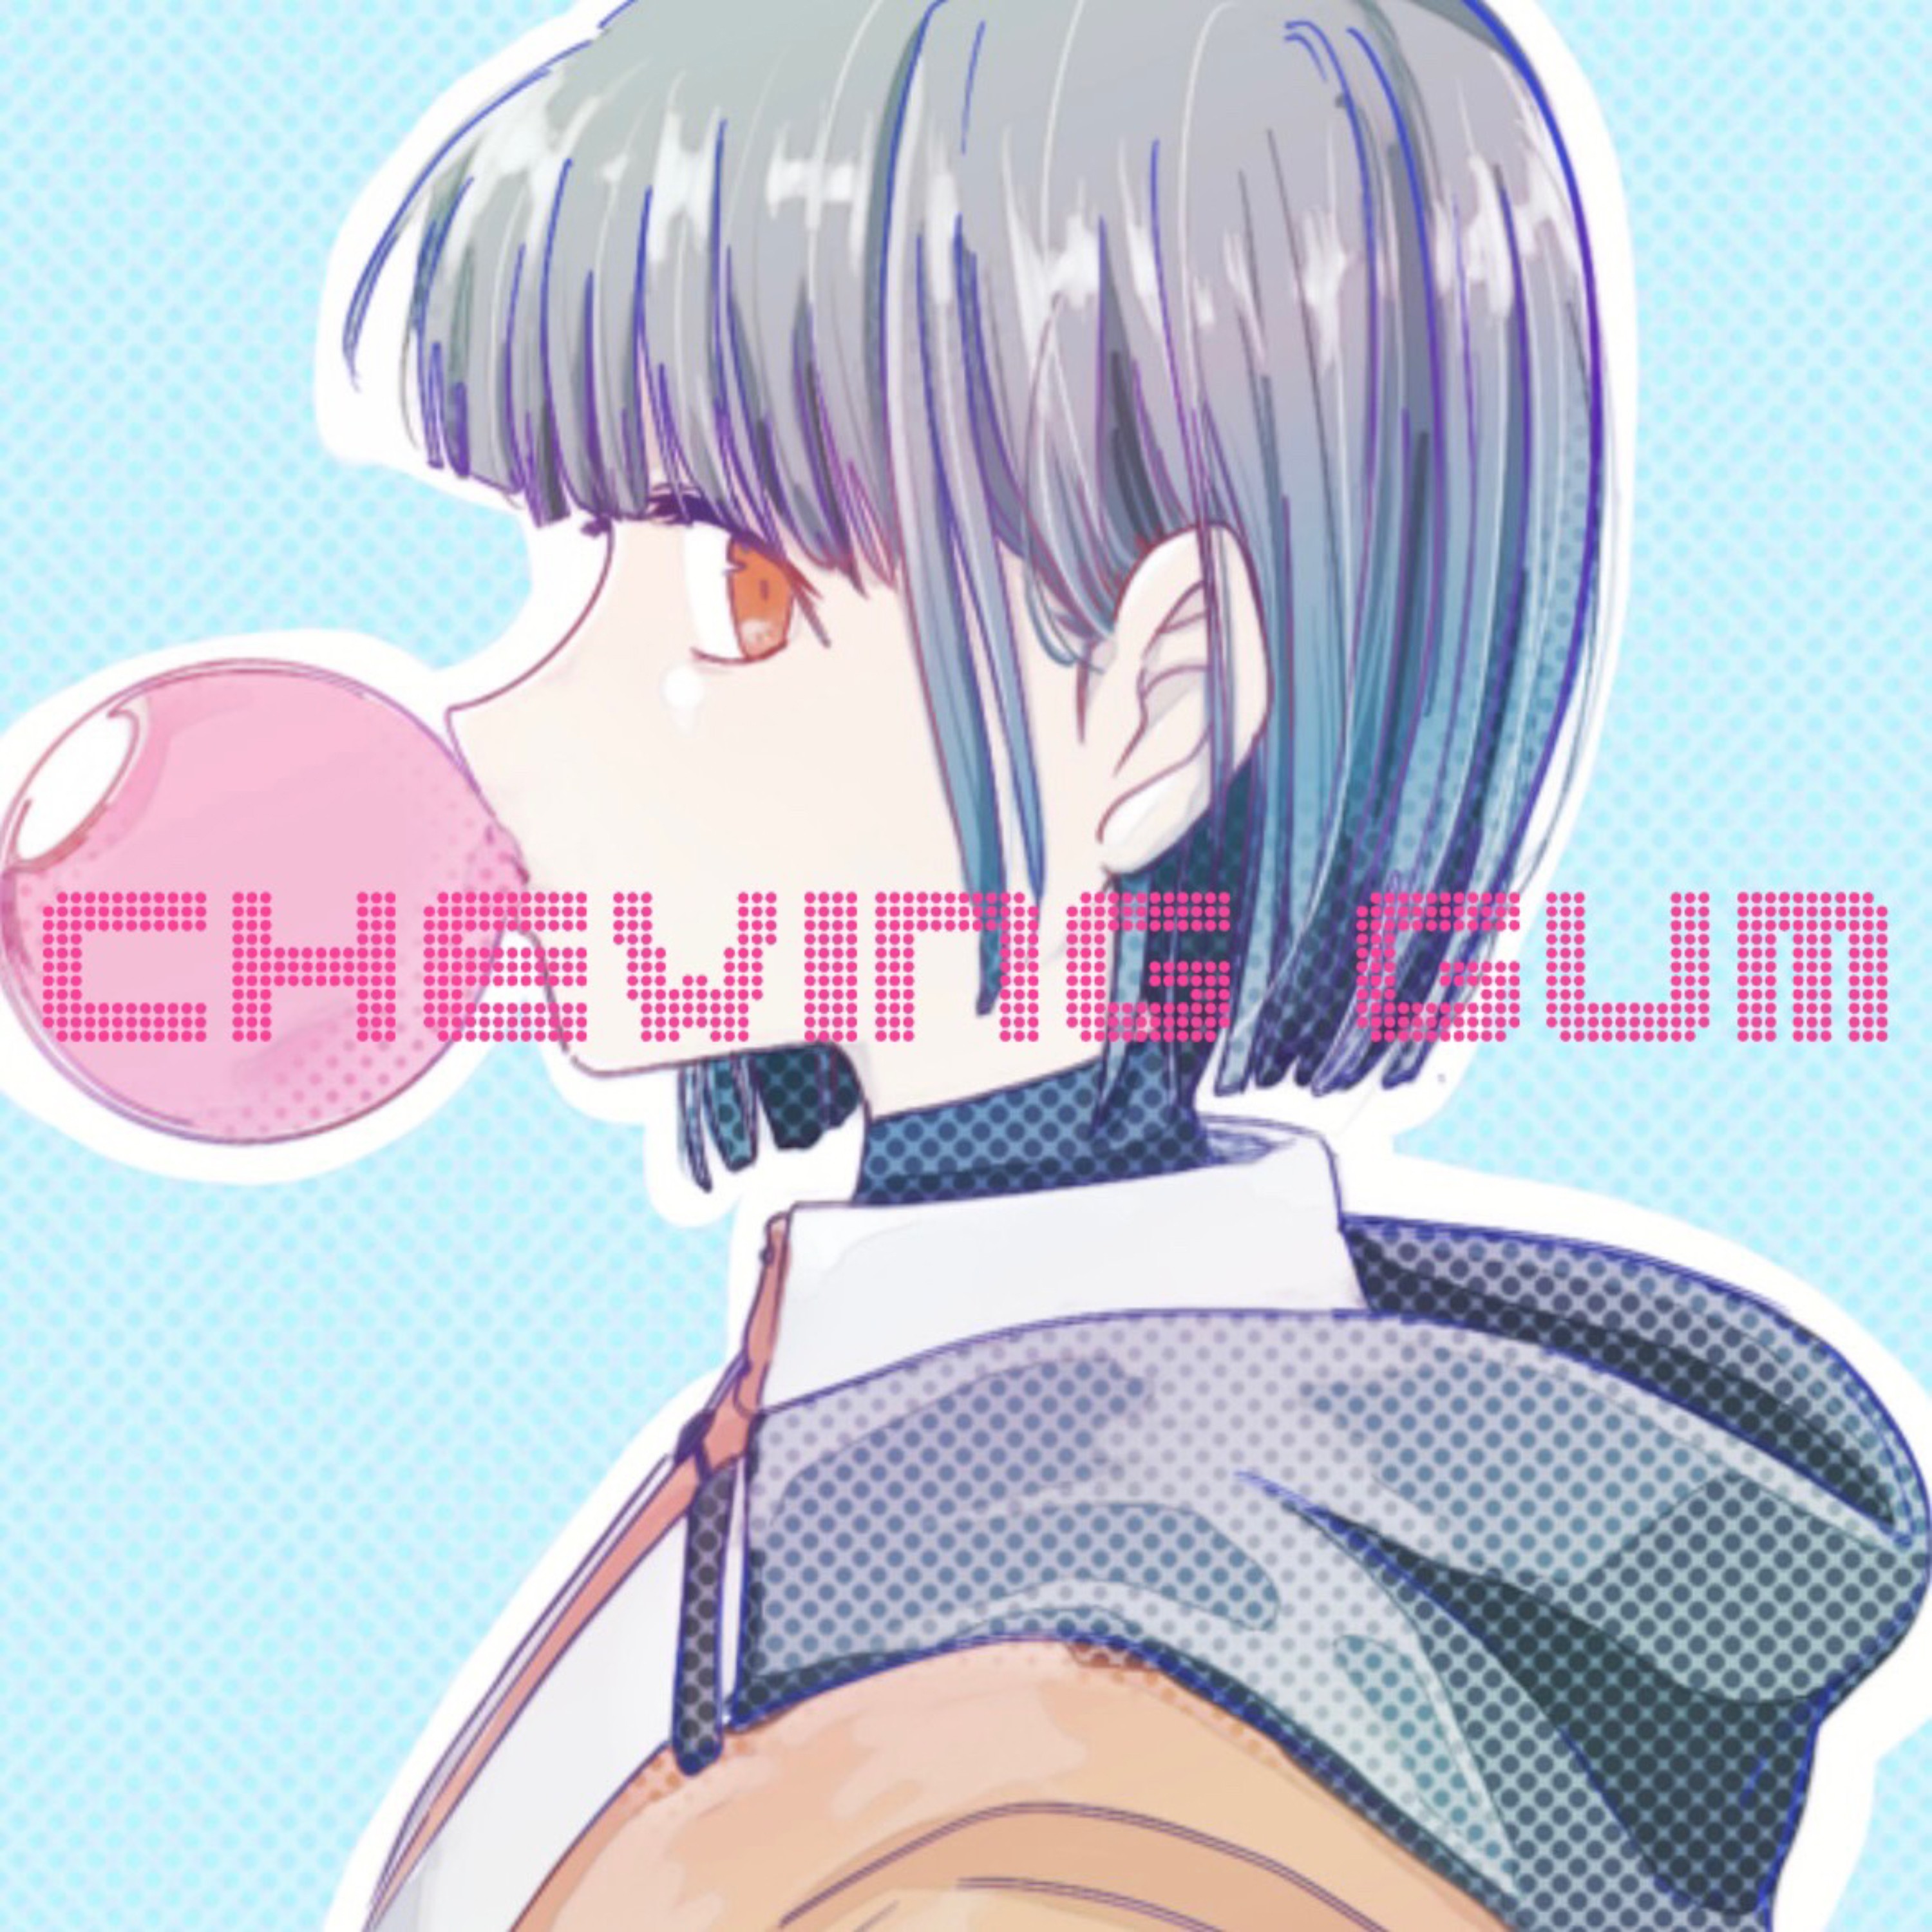 Chewing gum